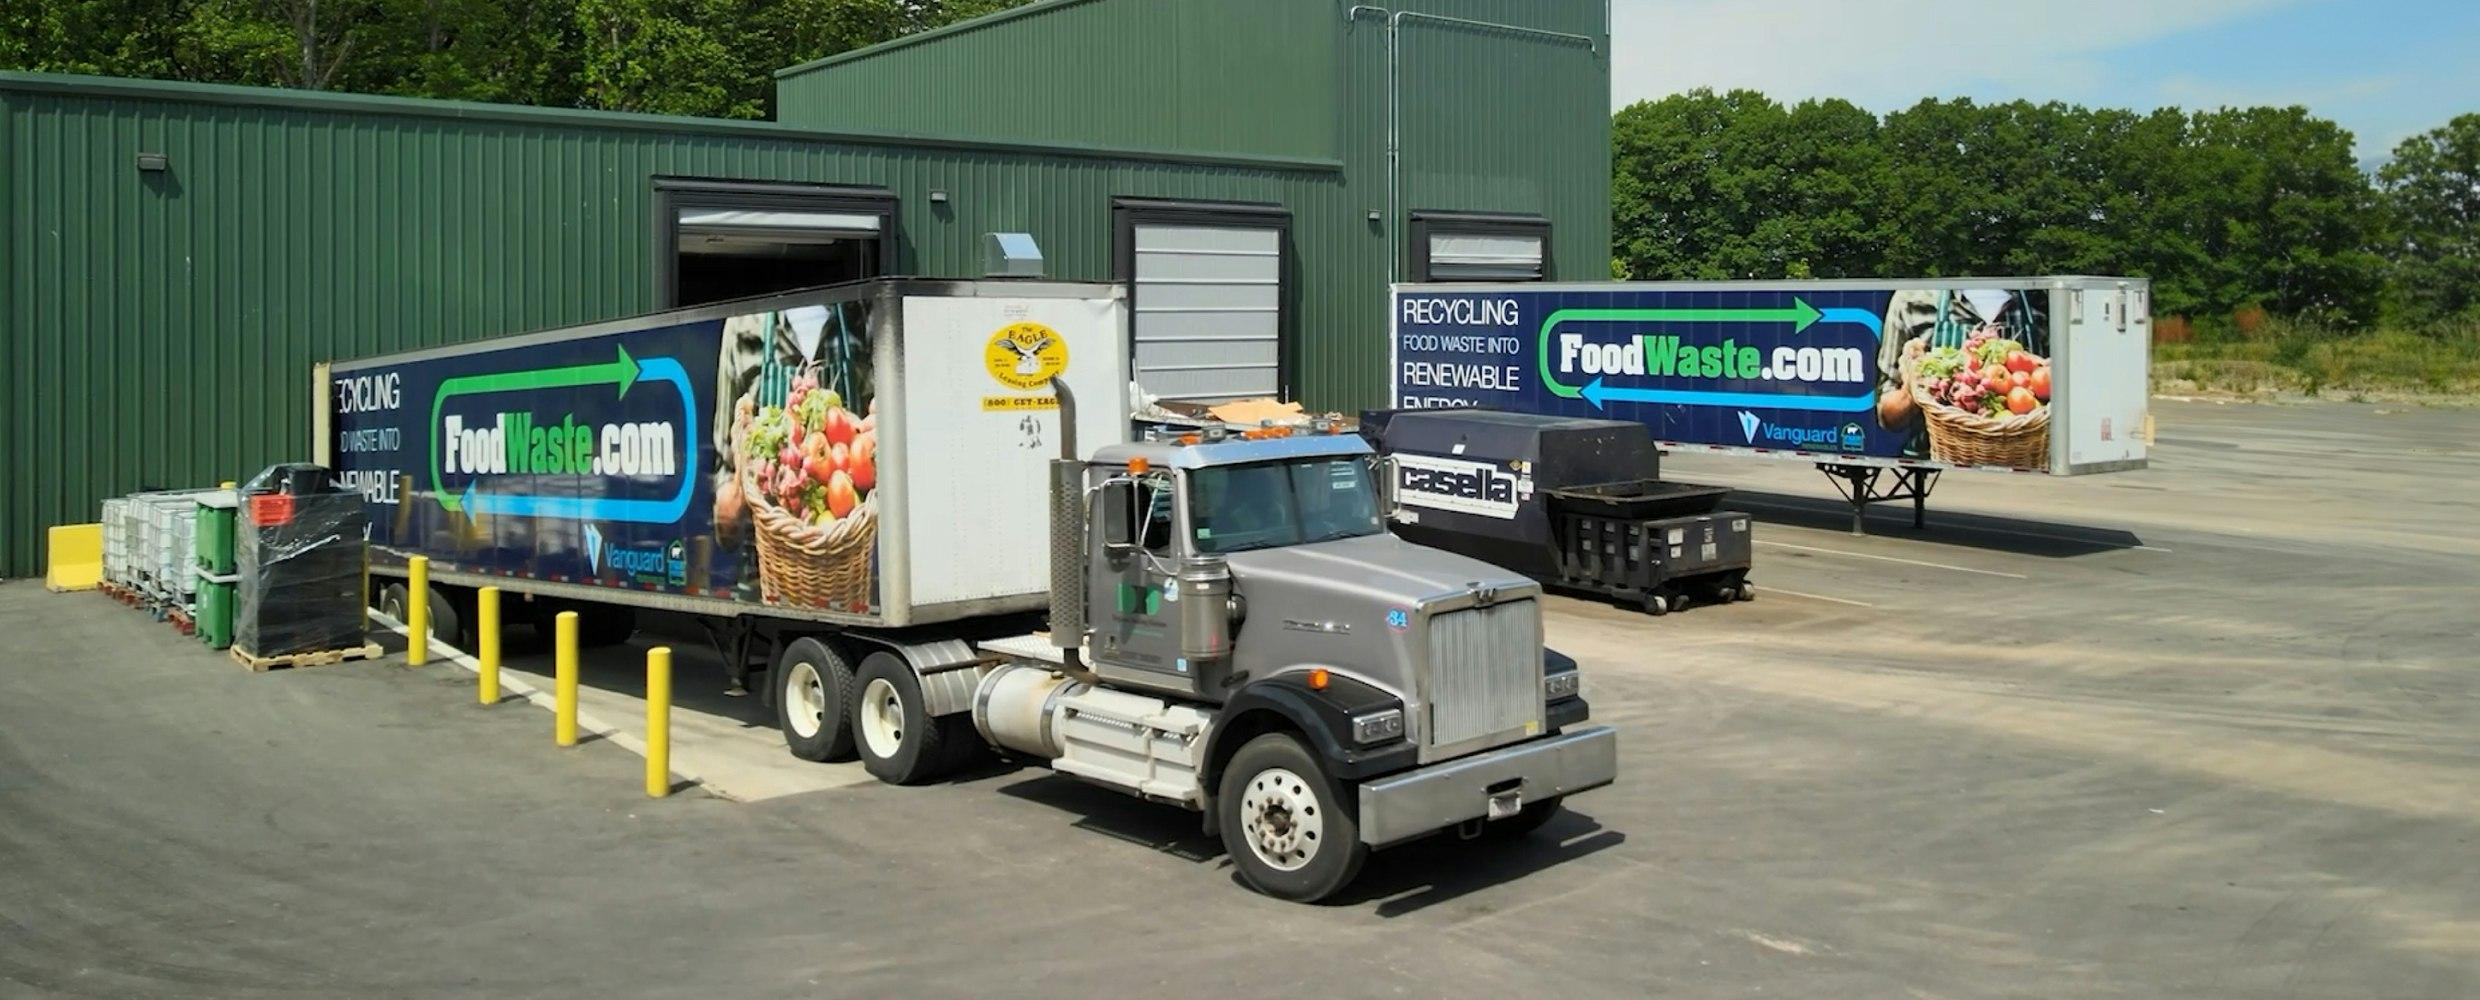 FoodWaste.com truck for commercial food waste recycling and waste management solutions